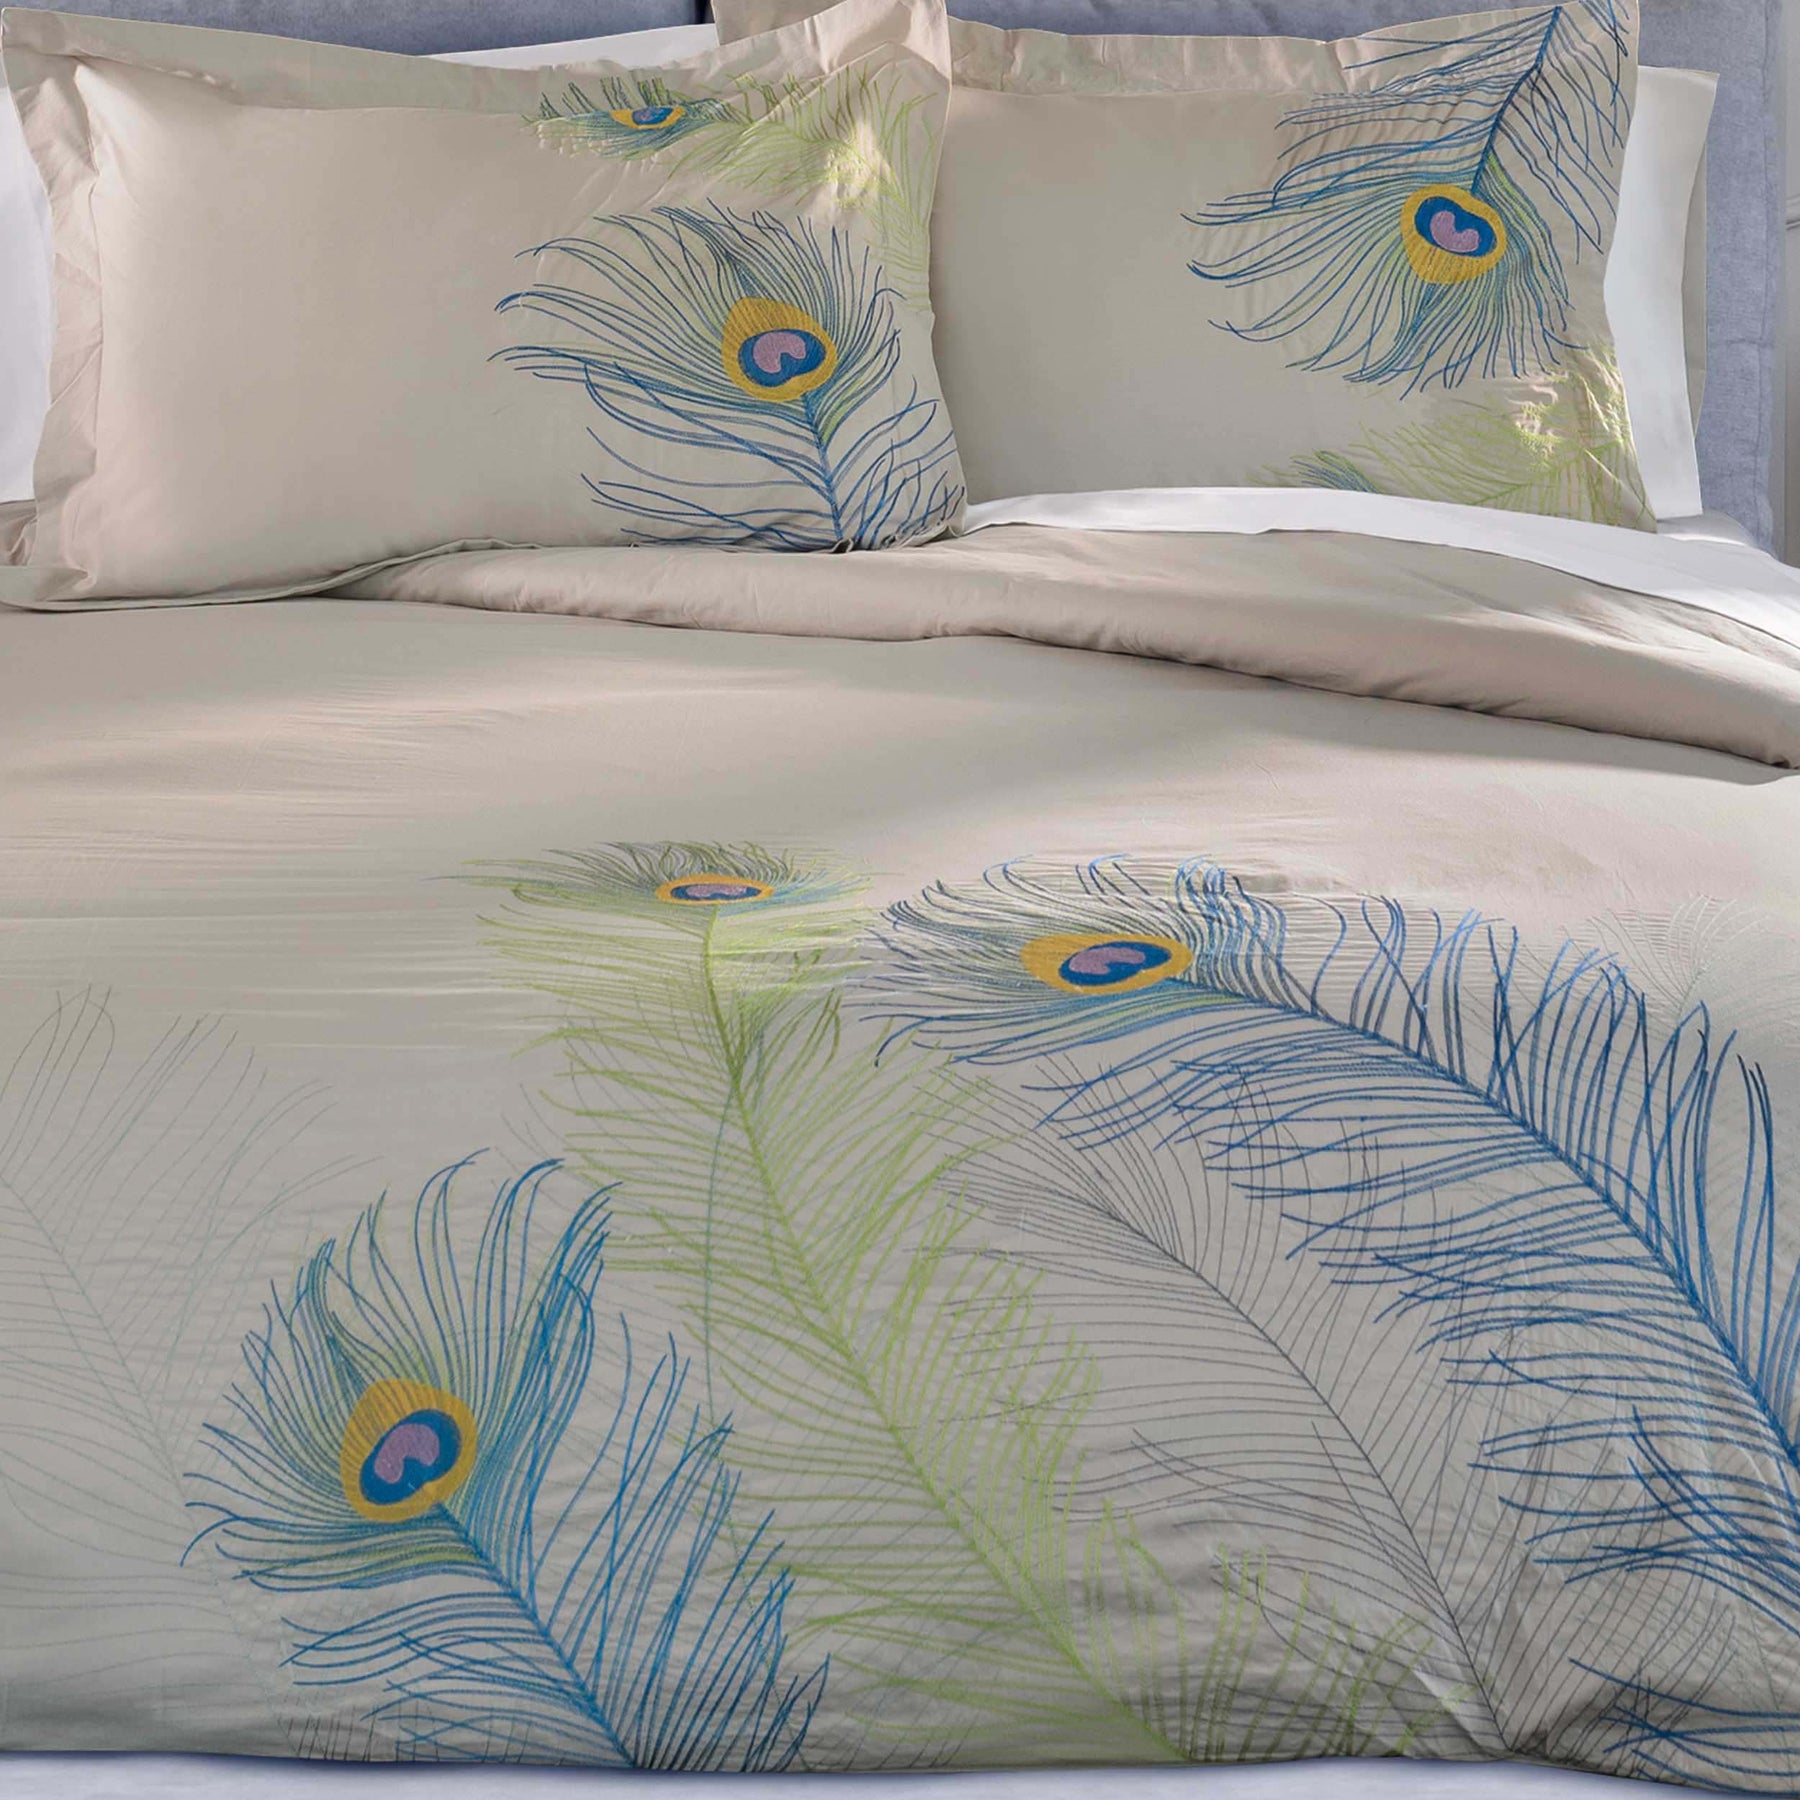 Embroidered Peacock Cotton Duvet Cover Set - Multicolored